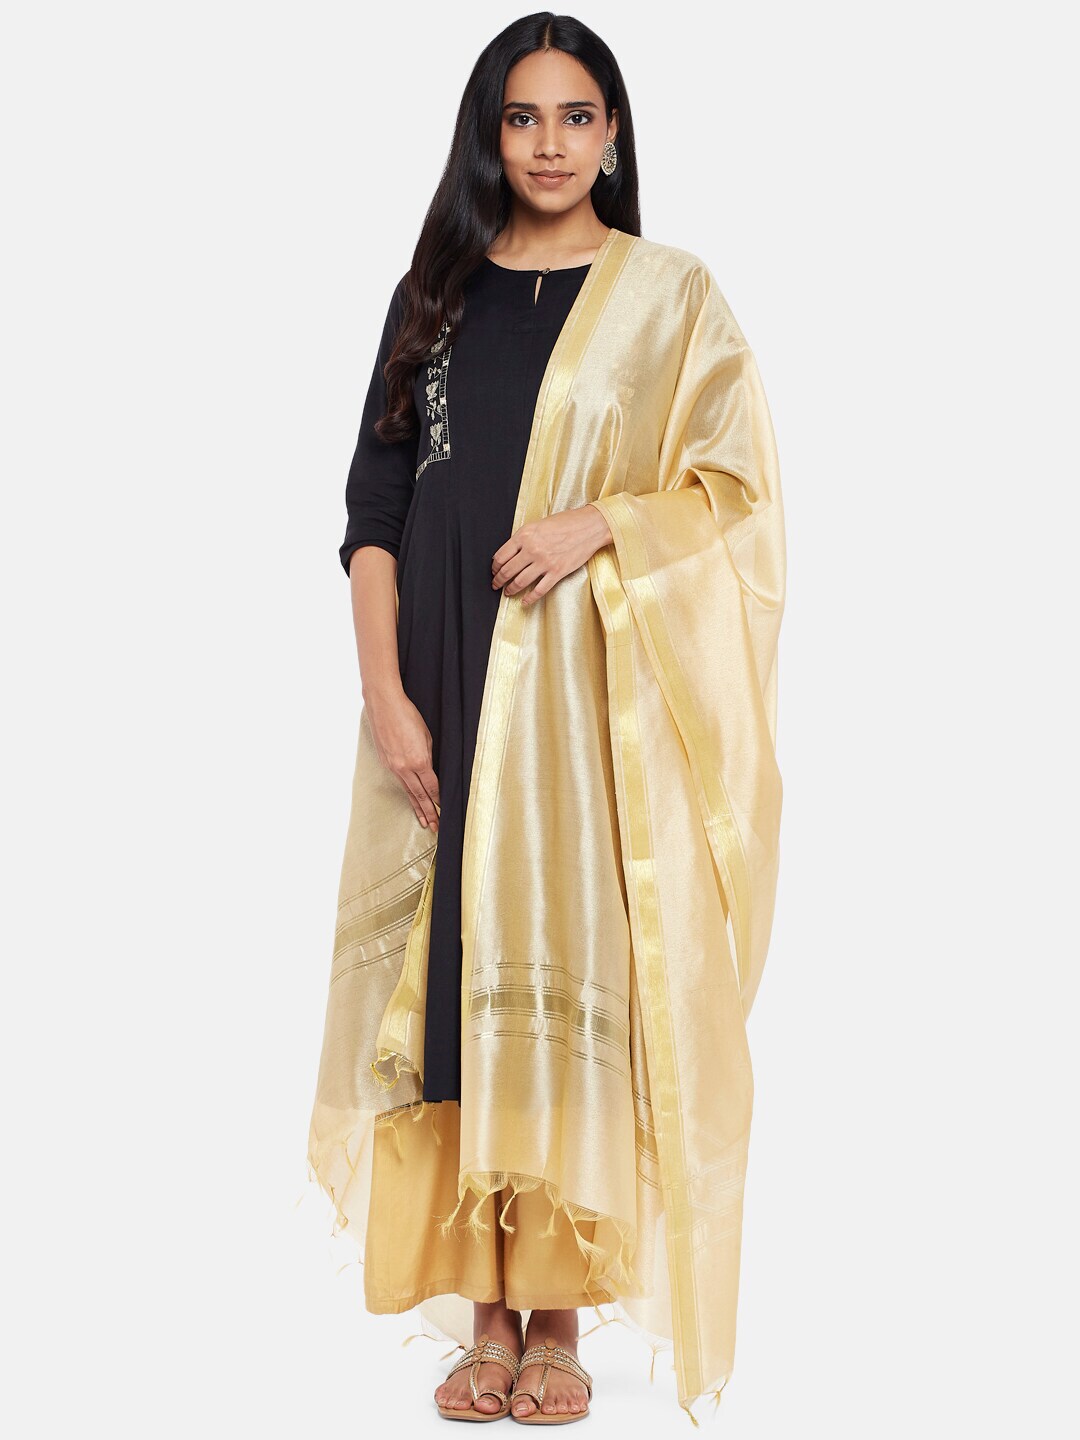 RANGMANCH BY PANTALOONS Gold-Toned Dupatta with Zari Price in India